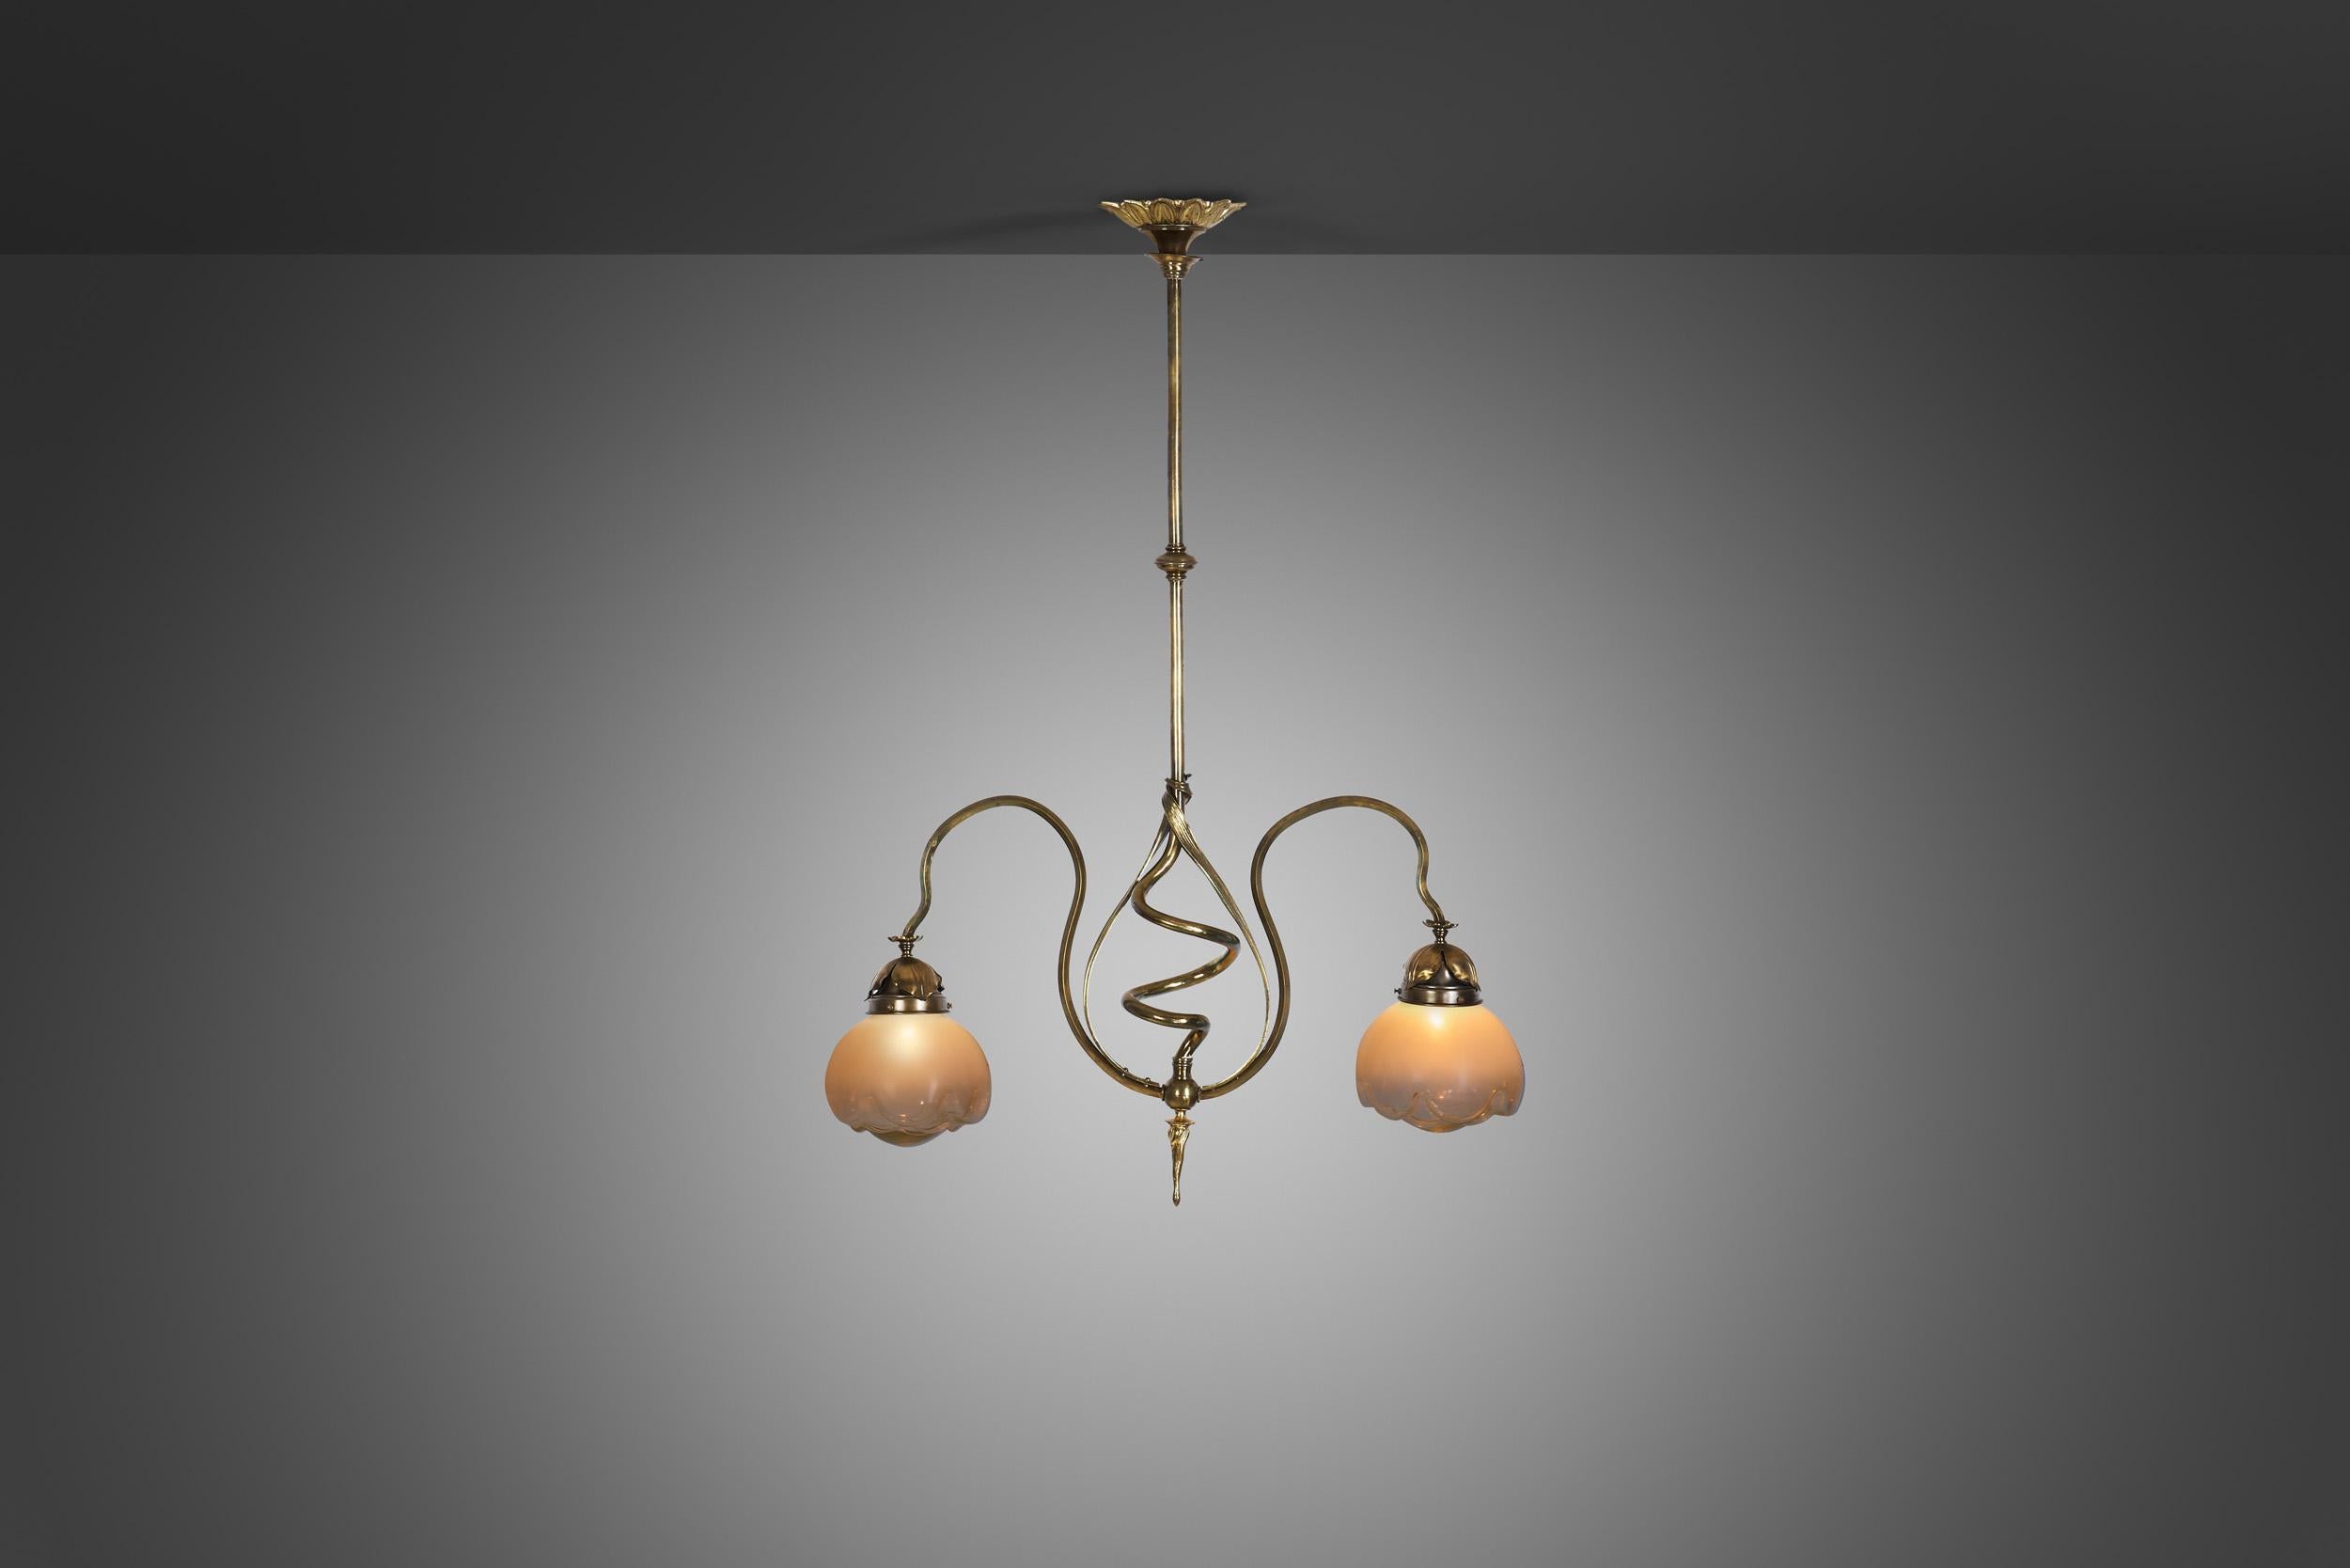 European Jugend Ceiling Lamp in Patinated Brass and Glass, Europe early 20th century For Sale